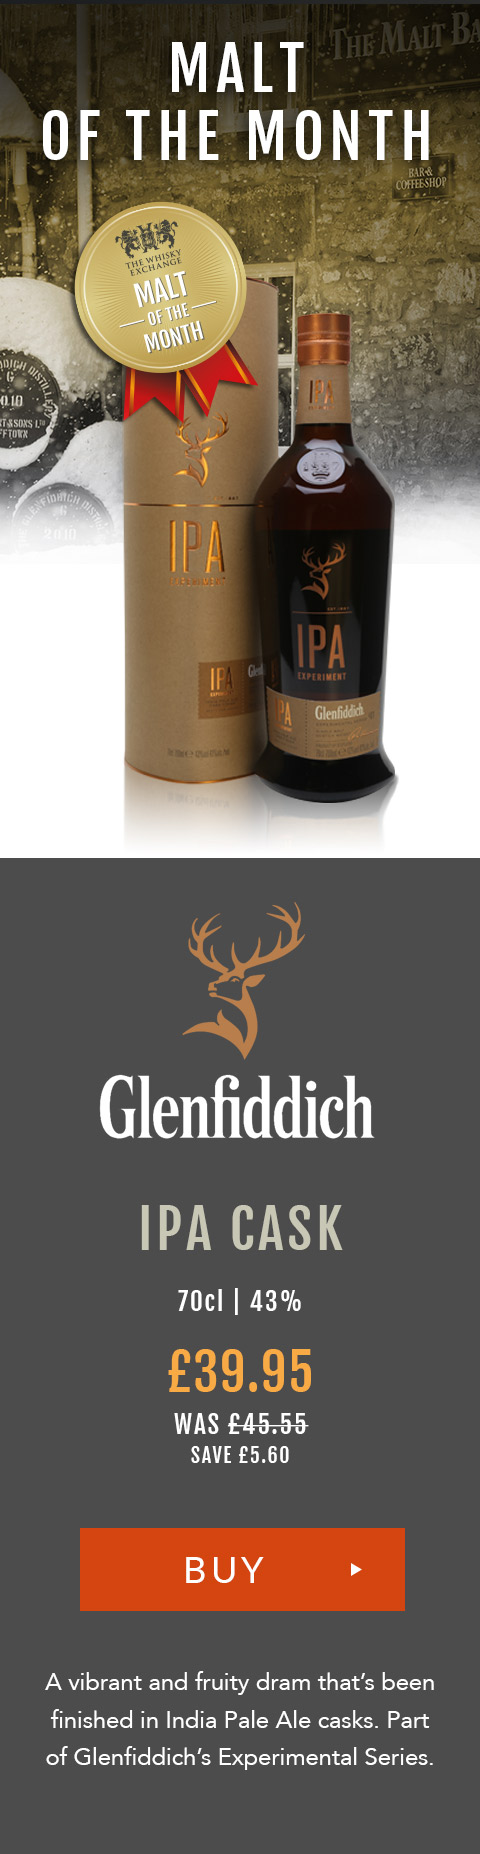 Malt of the Month
Glenfiddich
IPA Cask
Speyside Single Malt Scotch Whisky
70cl | 43%
A vibrant and fruity dram that’s been finished in India Pale Ale casks. Part of Glenfiddich’s Experimental Series.
£39.95 (was £45.55) save £5.60